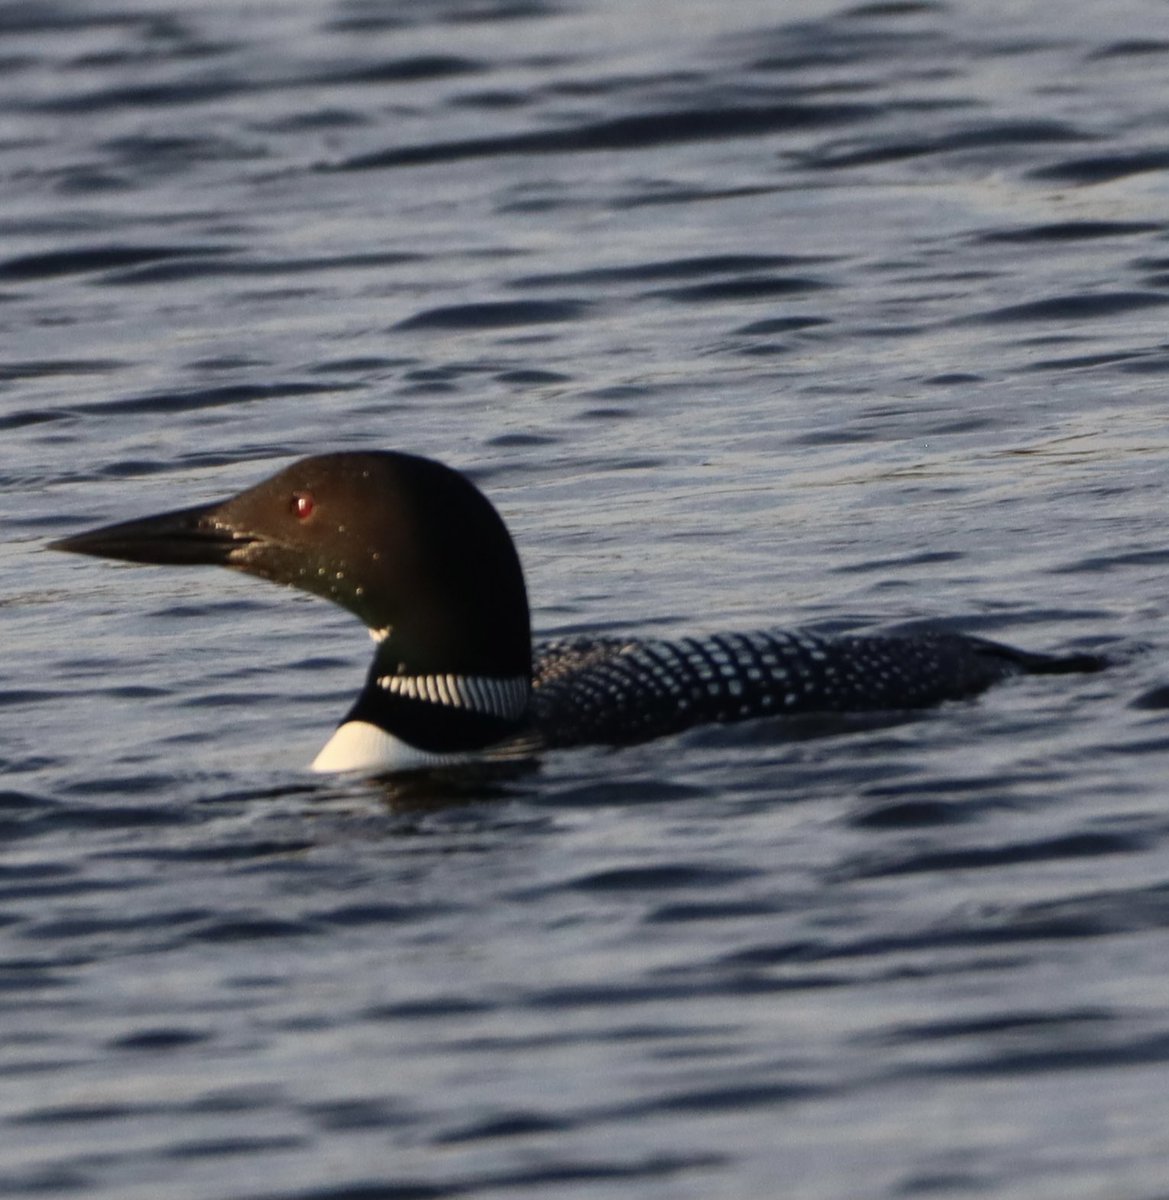 Hello #Monday ❤️ a Common Loon, cruising the warm waters of the Big Rideau ! So nice to see them so close to the shoreline ❤️ #loon #commonloon #TwitterNatureCommunity #NaturePhotography #TwitterNaturePhotography #BirdTwitter #birdphotography #Birds ❤️